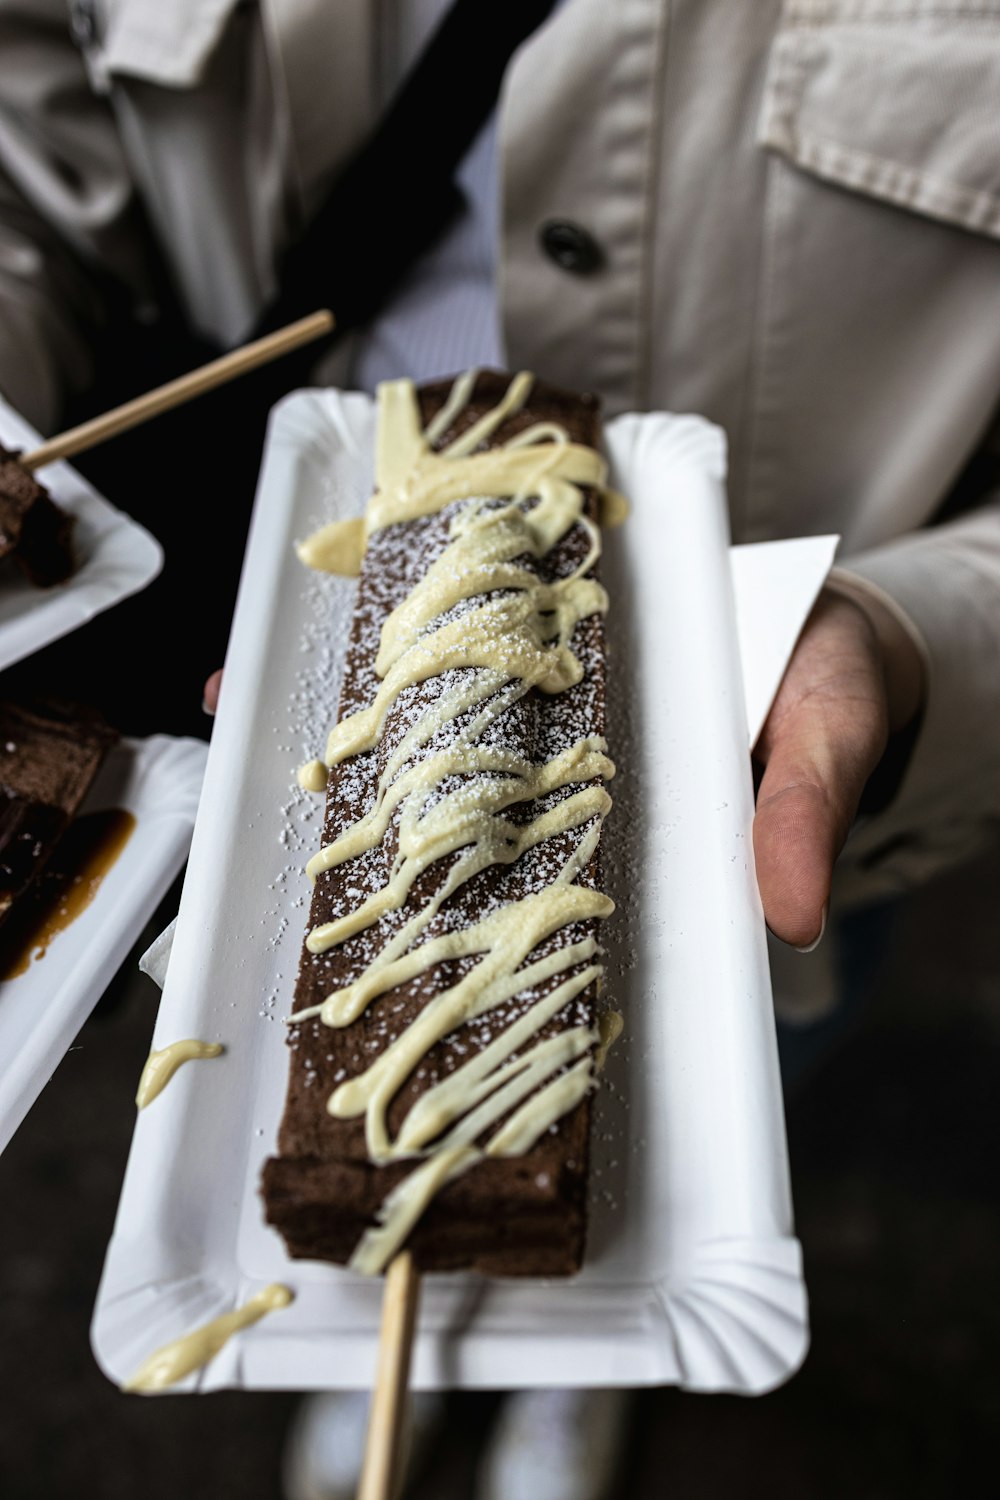 a person holding a plate with a chocolate dessert on it